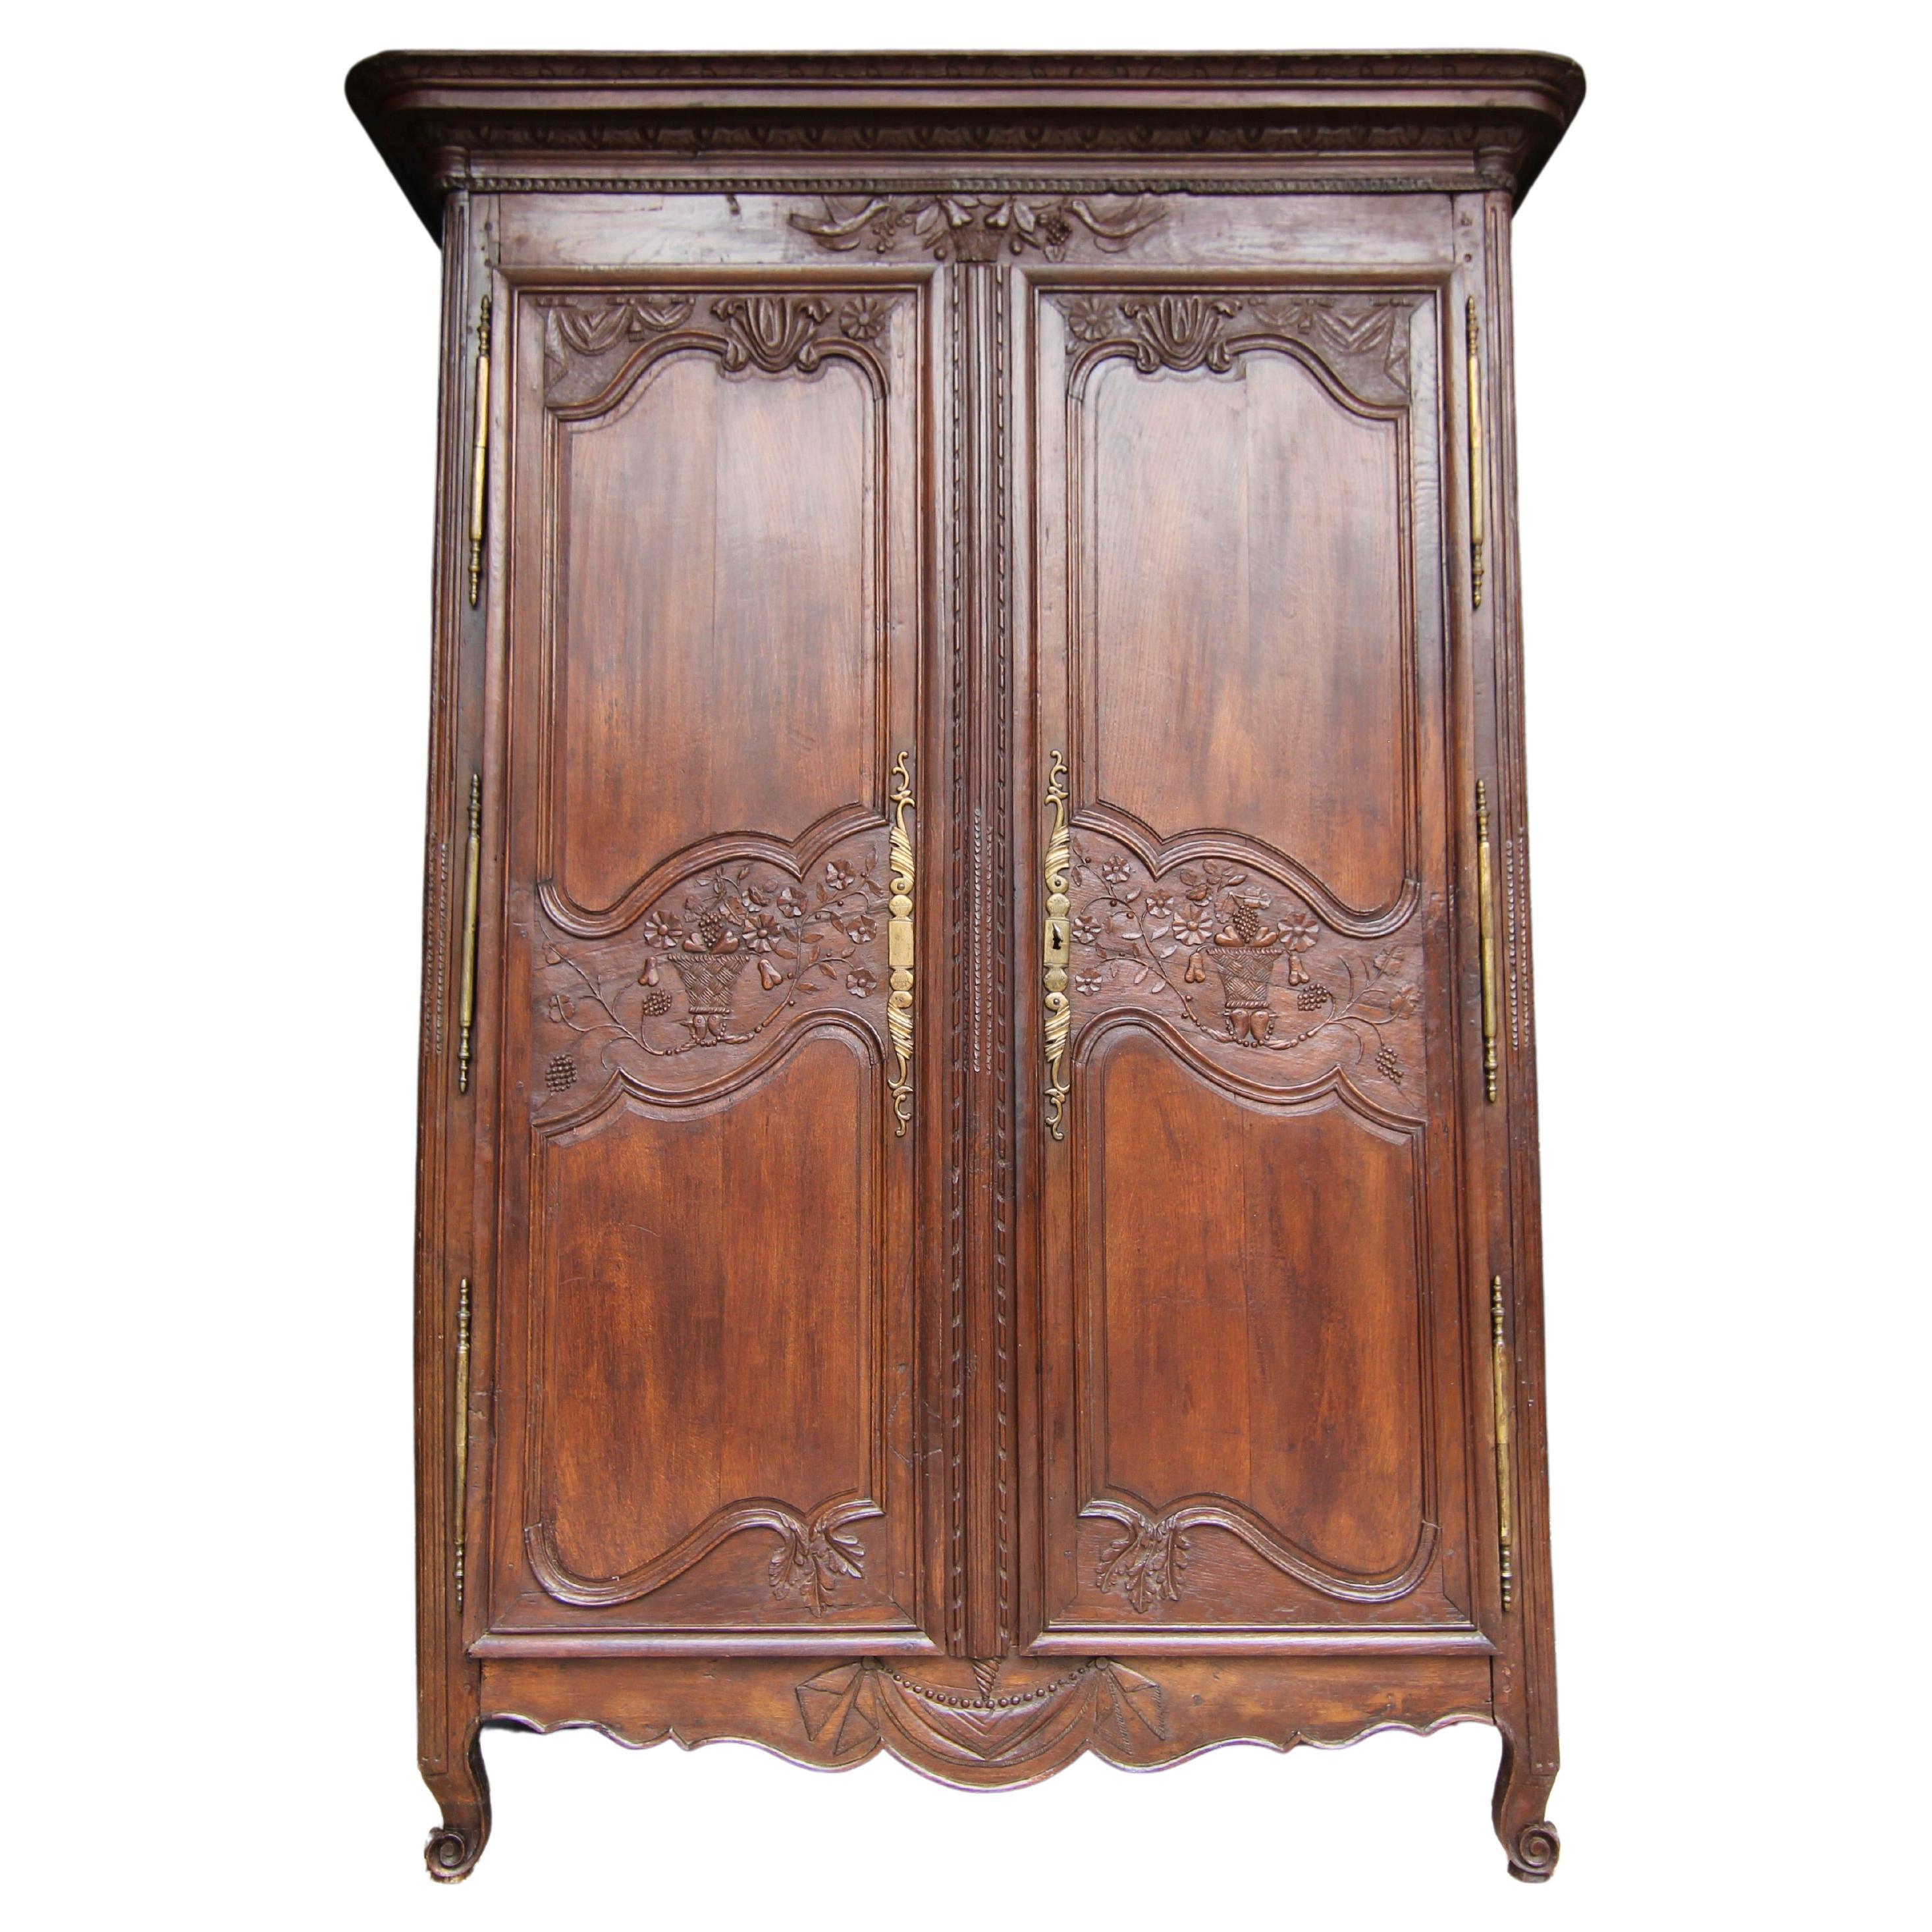 Late 18th Century French Provincial Marriage Armoire or Cabinet